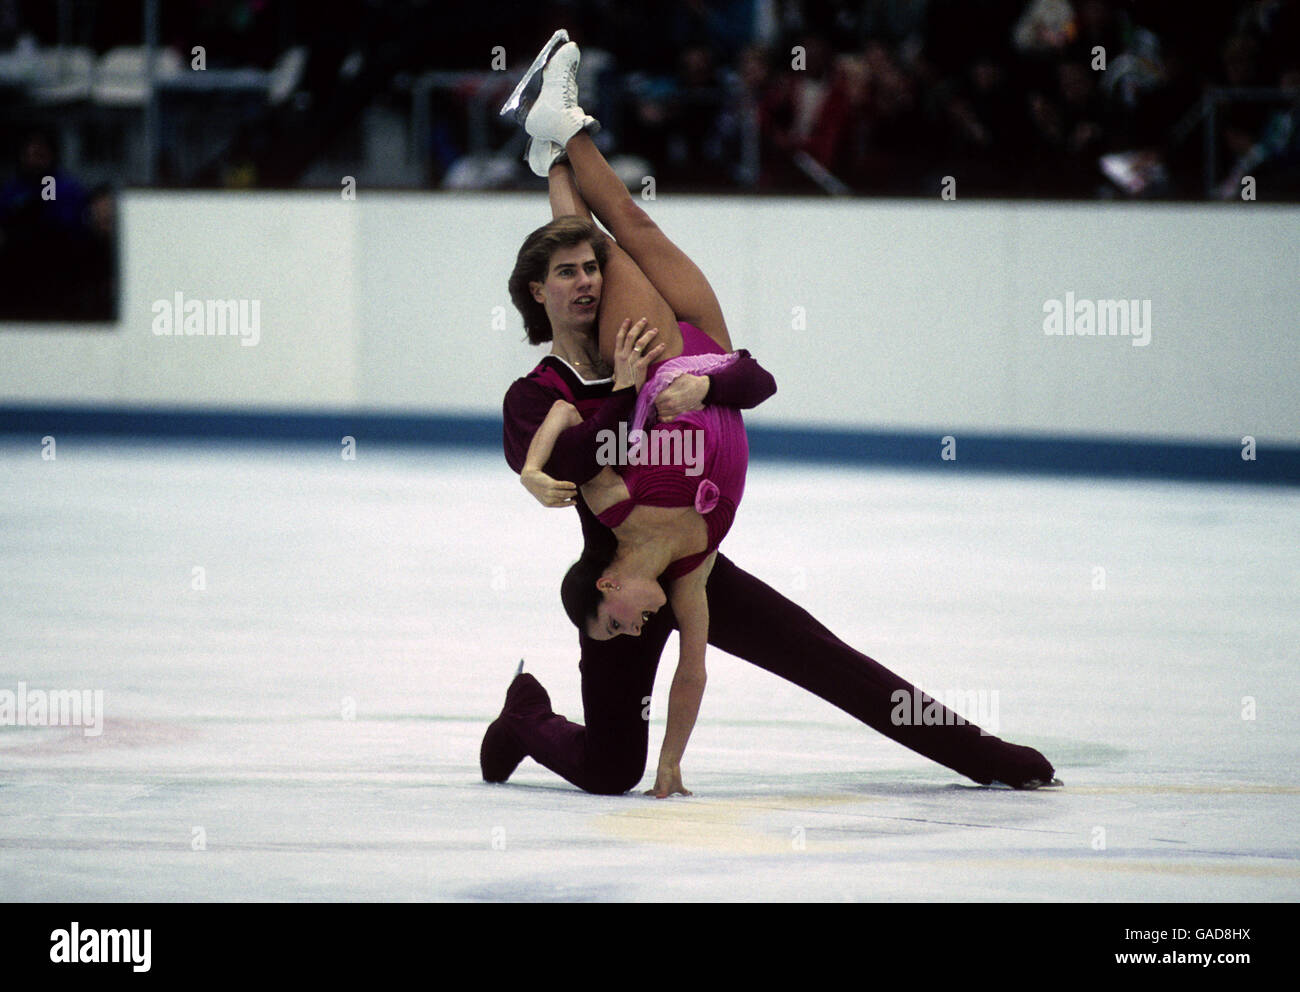 Canada's Mark Janoschak and Jaqueline Petra compete in the Ice Dancing Stock Photo